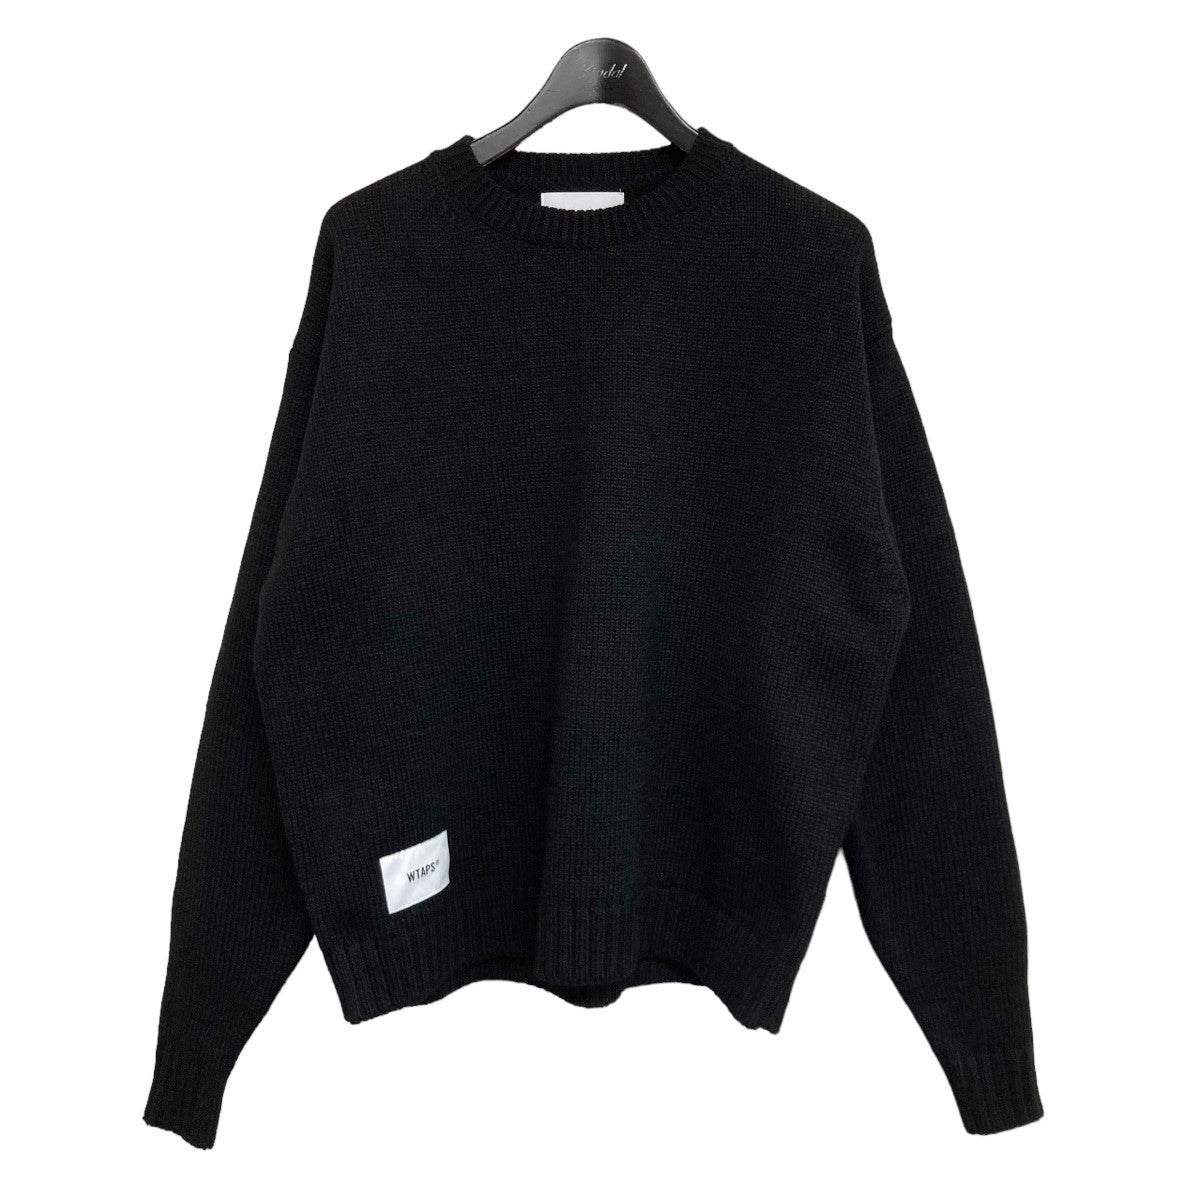 WTAPS(ダブルタップス) 2023AW 「CREW NECK 02 SWEATER POLY． SIGN 